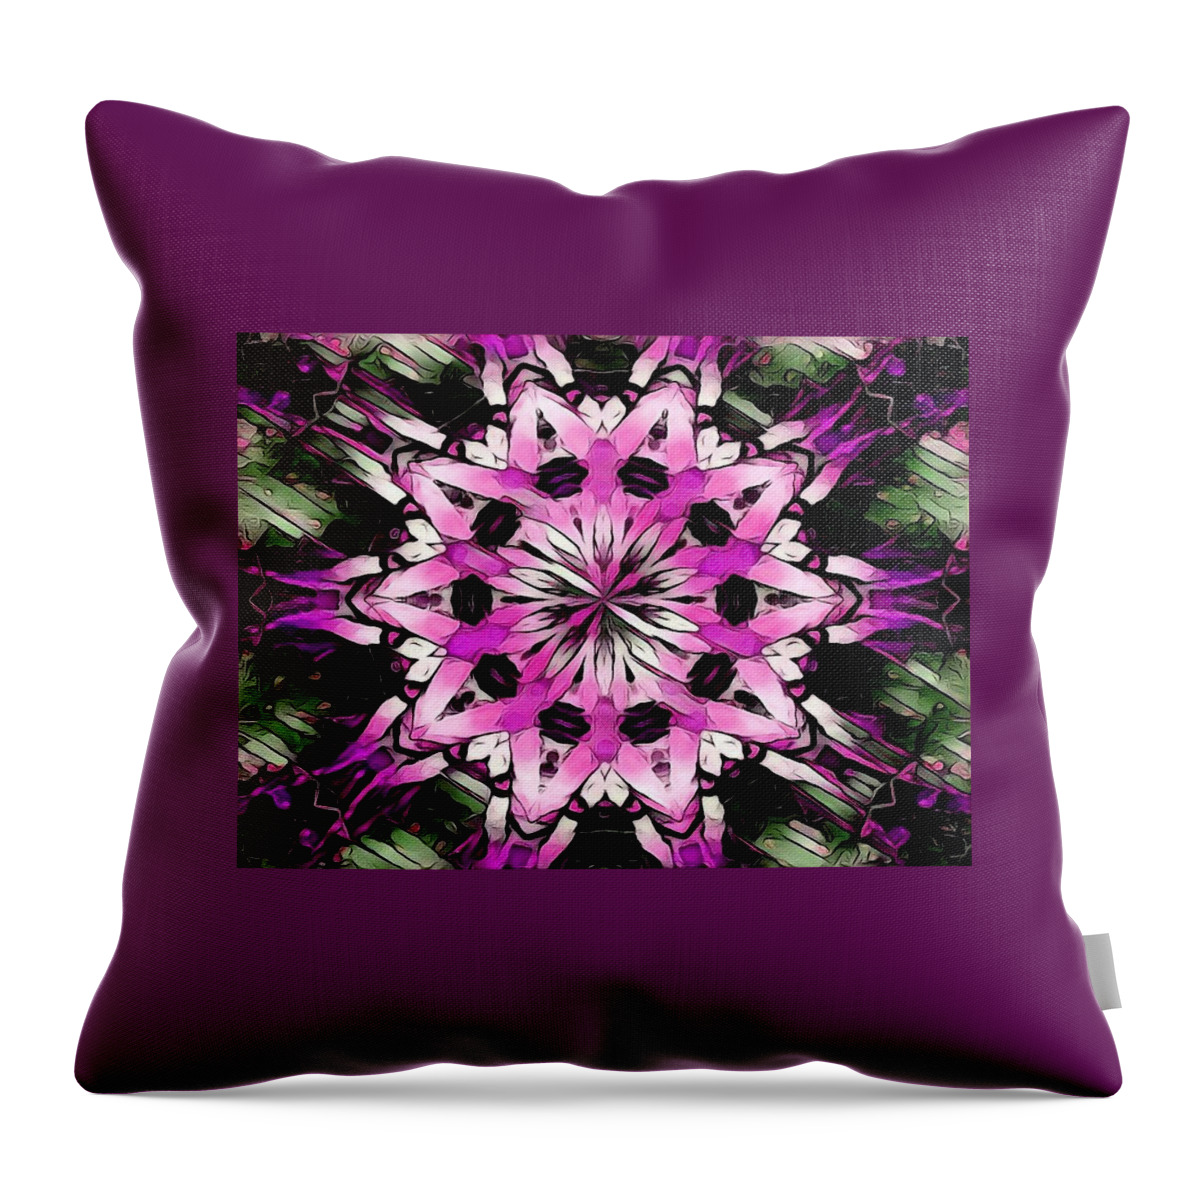 Digital Art Throw Pillow featuring the digital art Fractal Abstract by Artful Oasis 3 by Artful Oasis